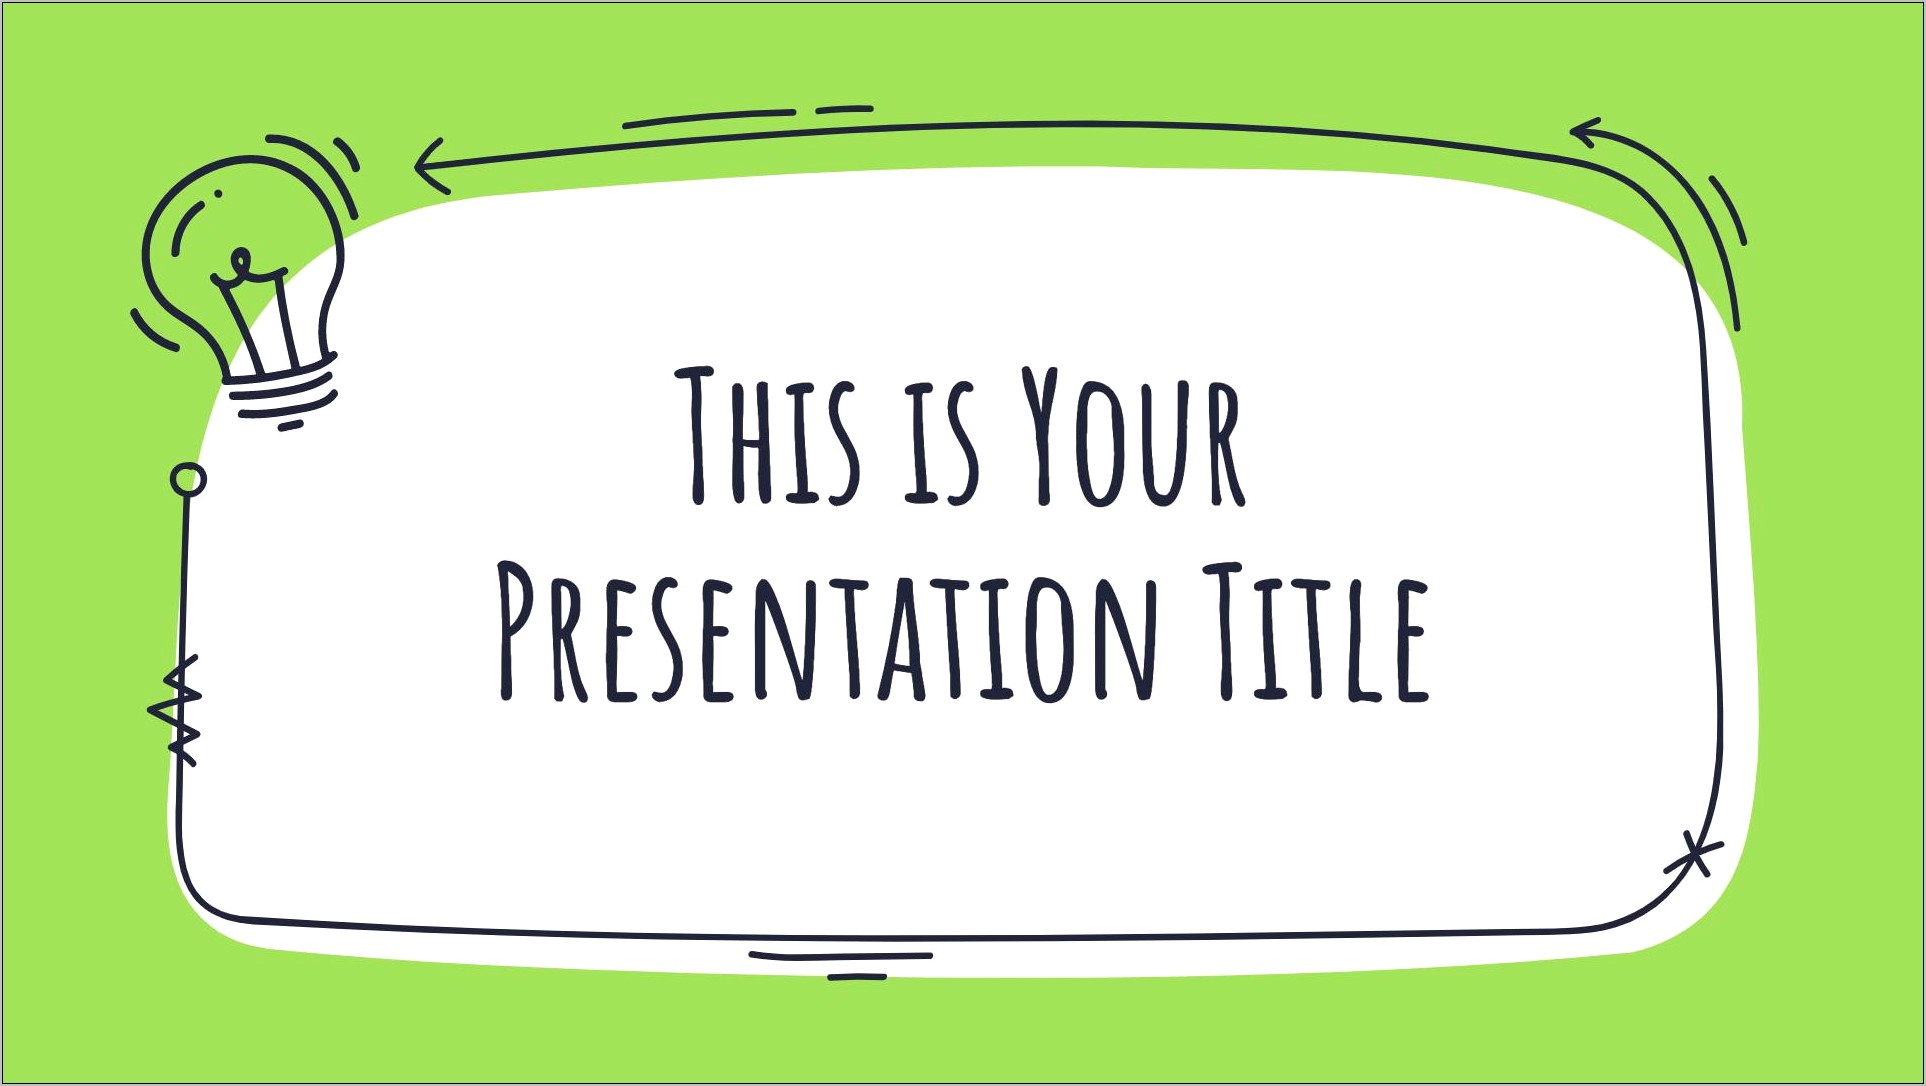 Create Your Own Powerpoint Template Free